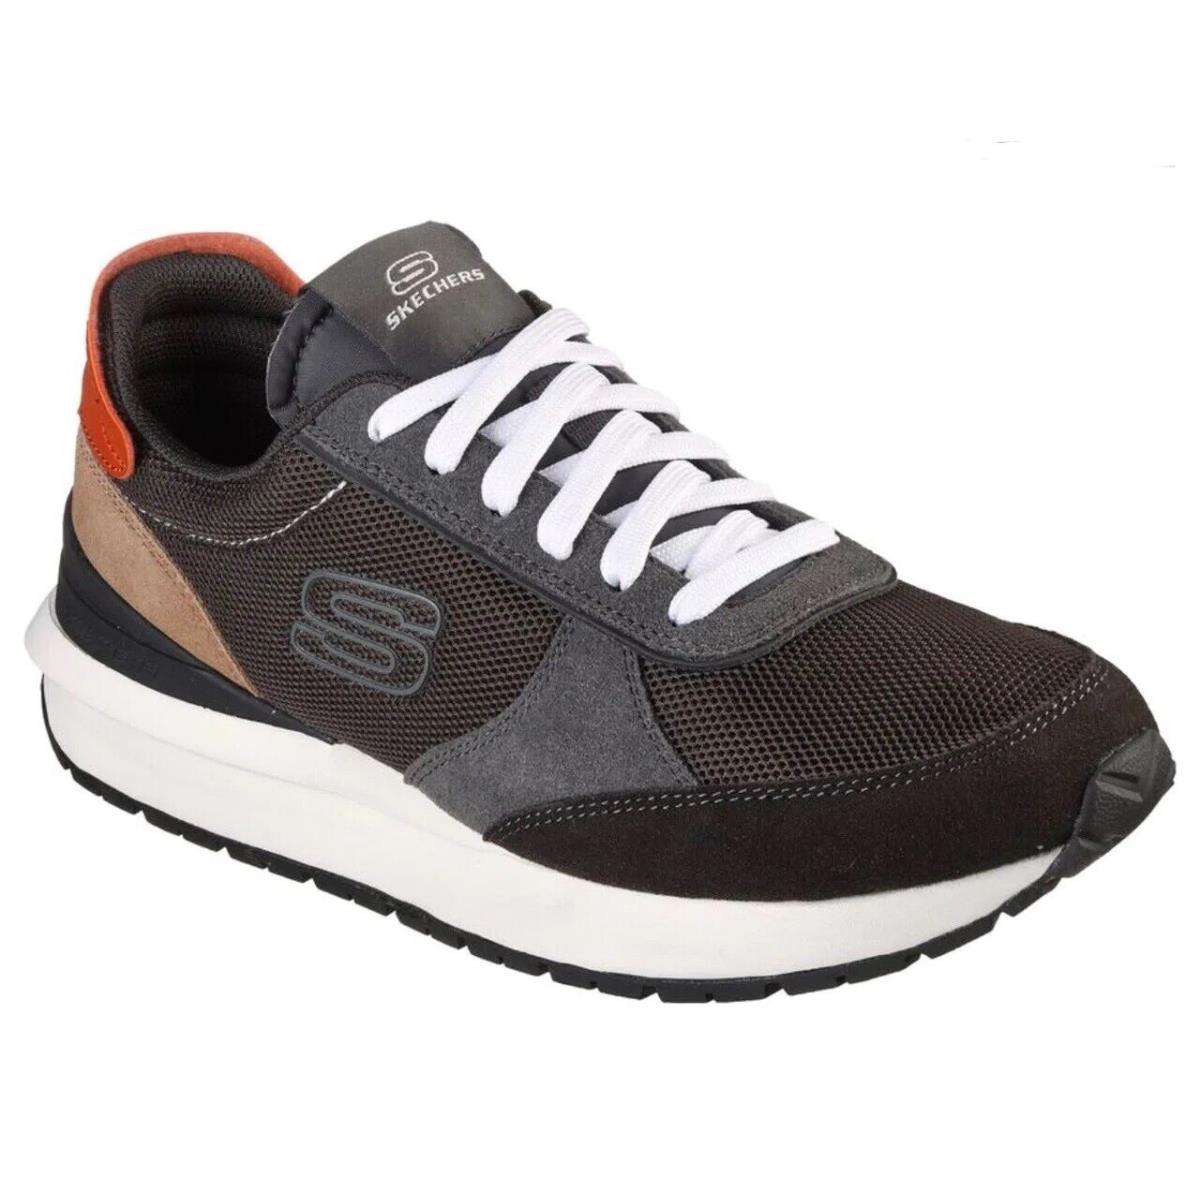 Skechers shoes Sunny Dale Miyoto - Charcoal/Black 8